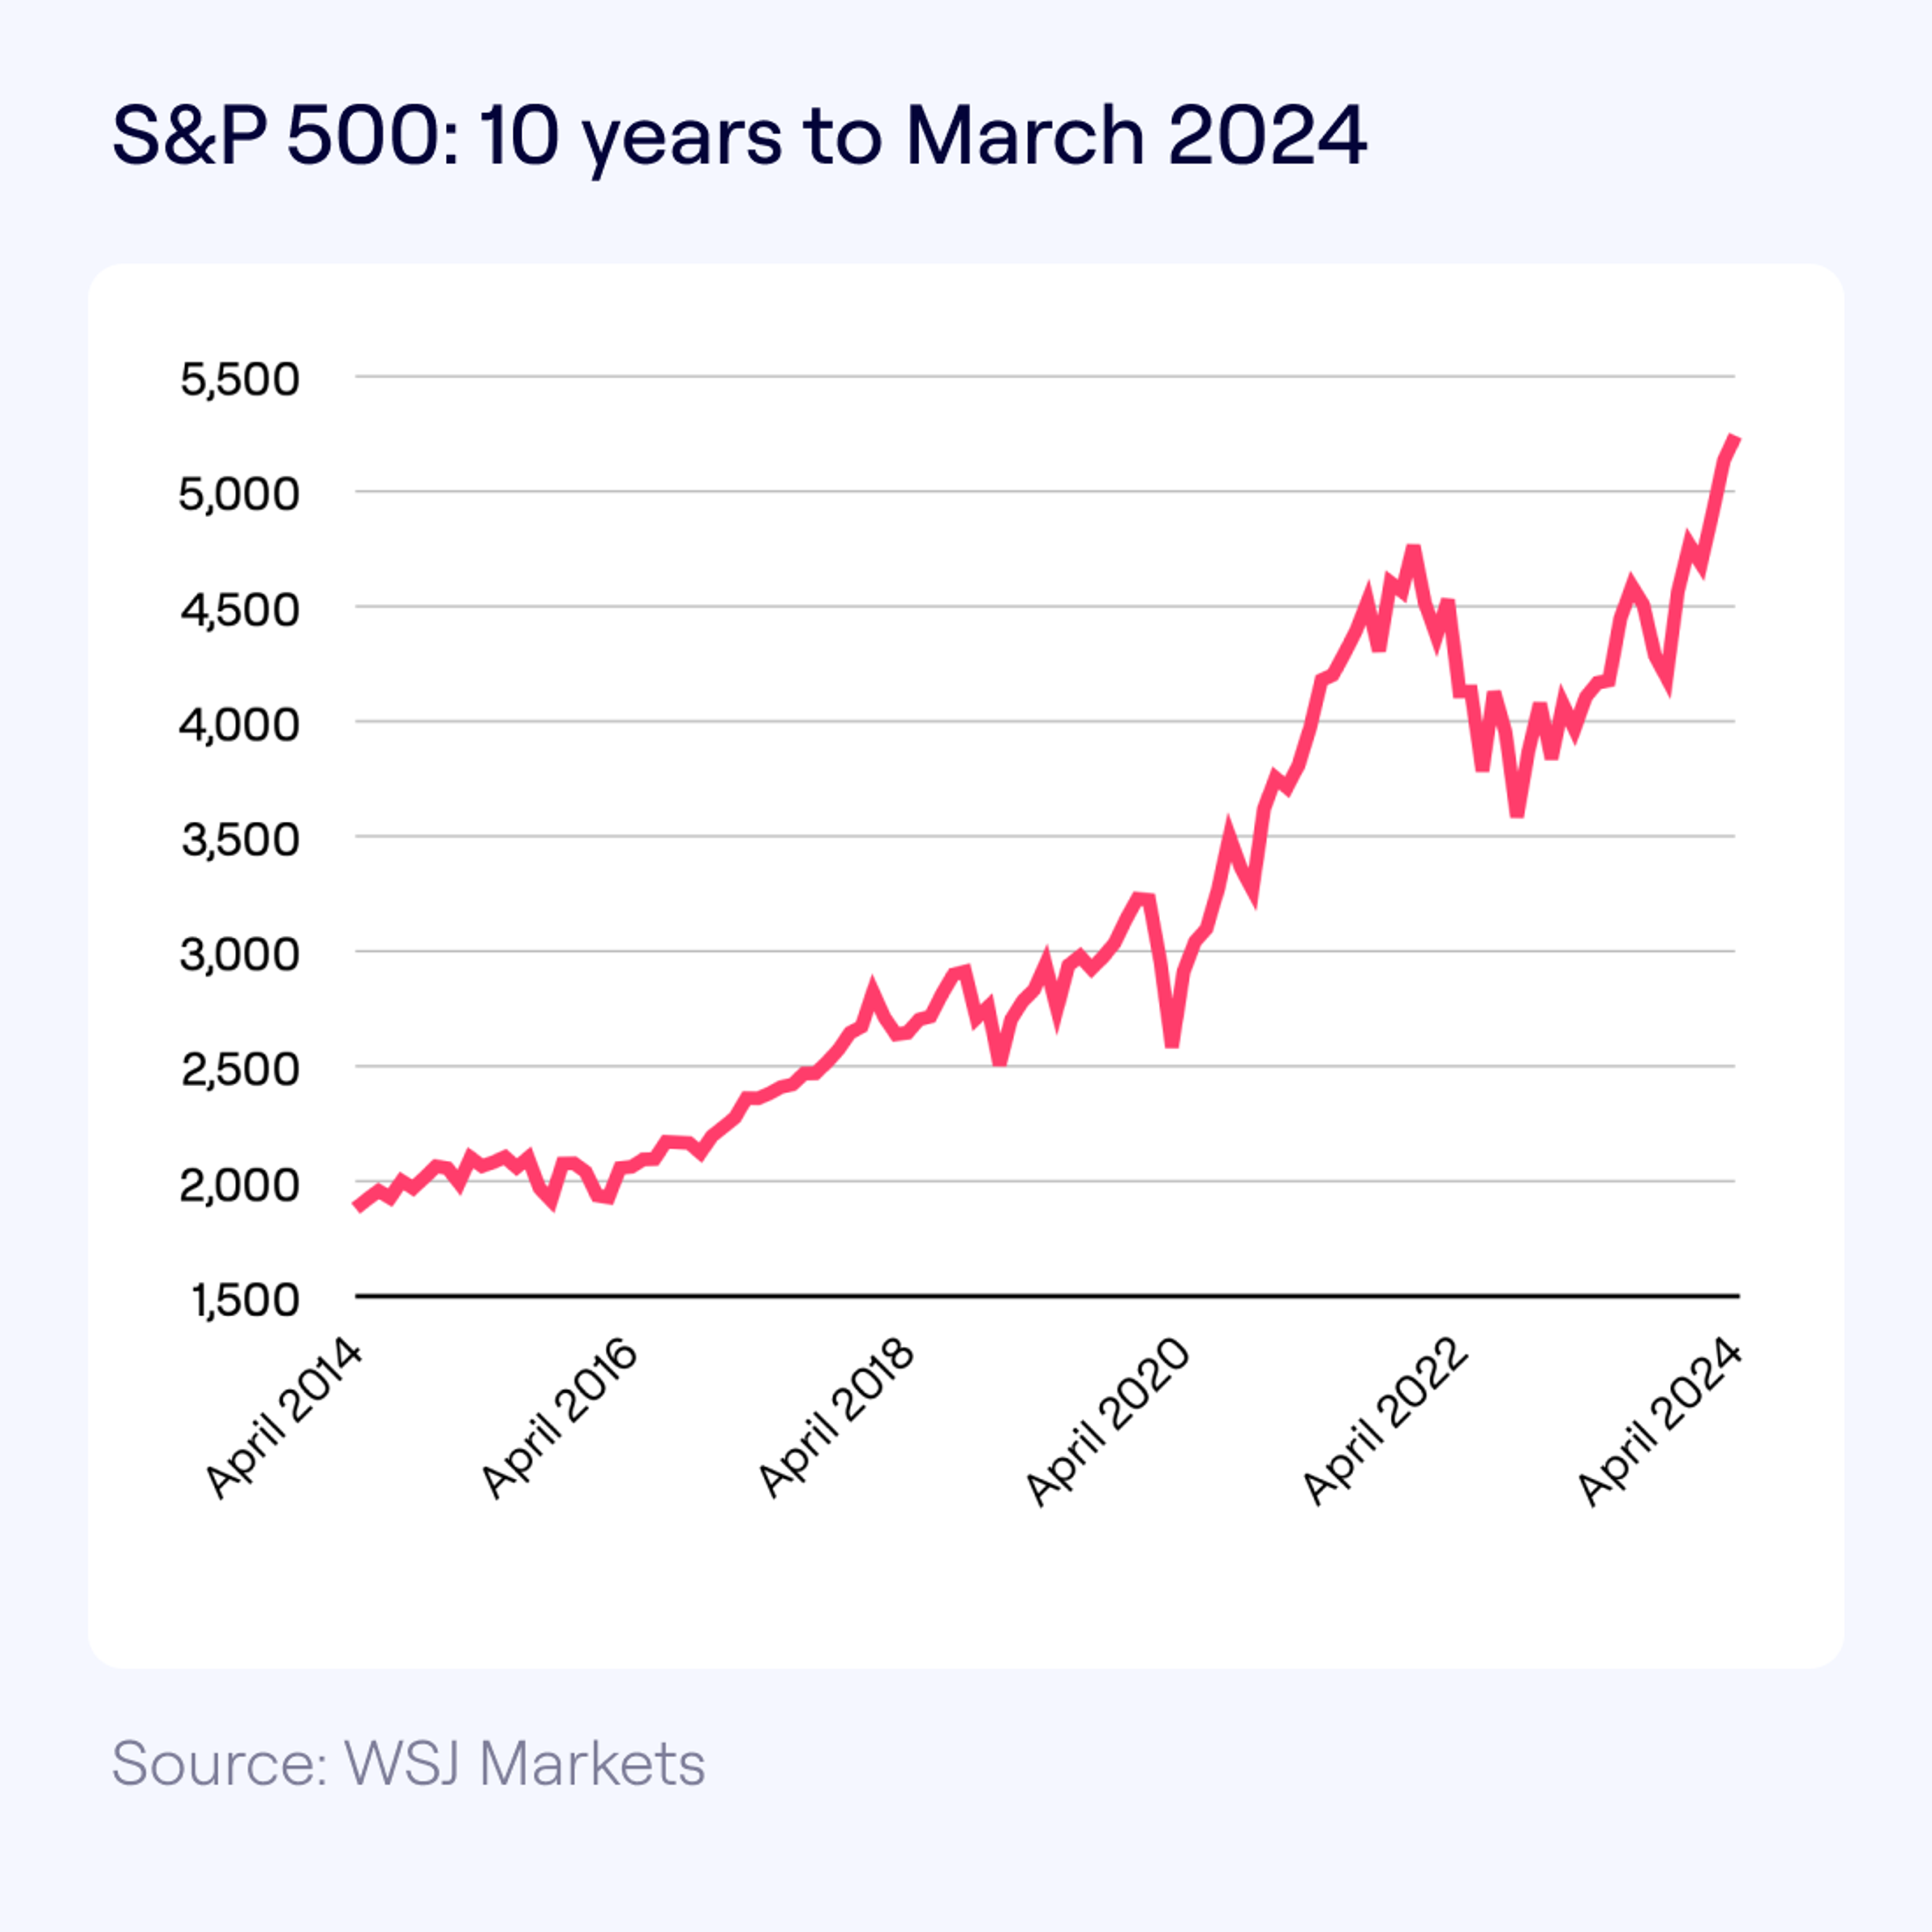 Line graph of the S&P 500 index over the last 10 years, indicating a long-term upward trend with some periods of volatility. Overall, the trend shows significant growth over the decade.